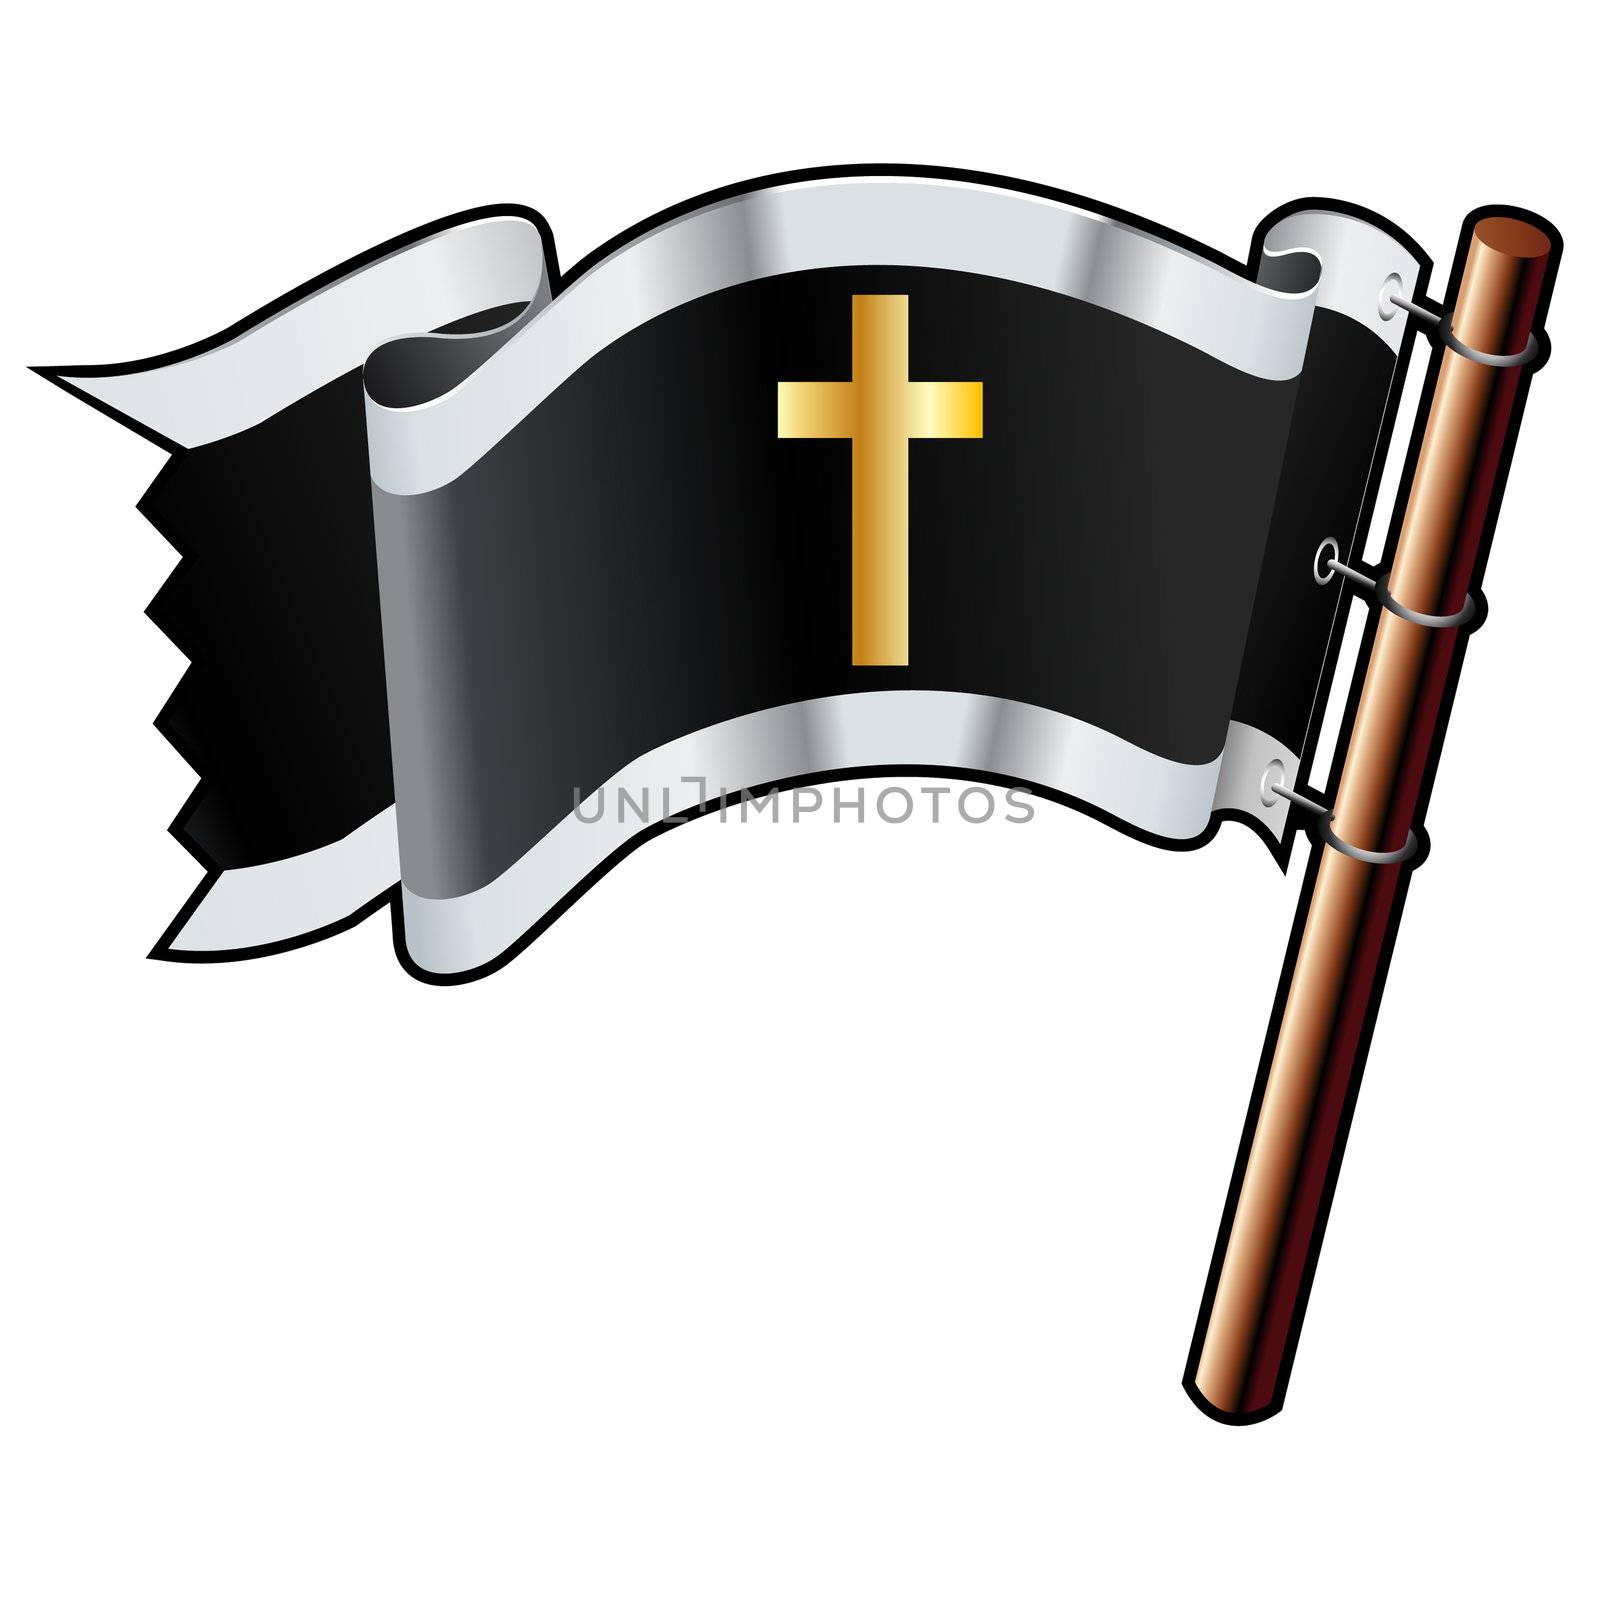 Christian cross religious icon on black, silver, and gold vector flag good for use on websites, in print, or on promotional materials